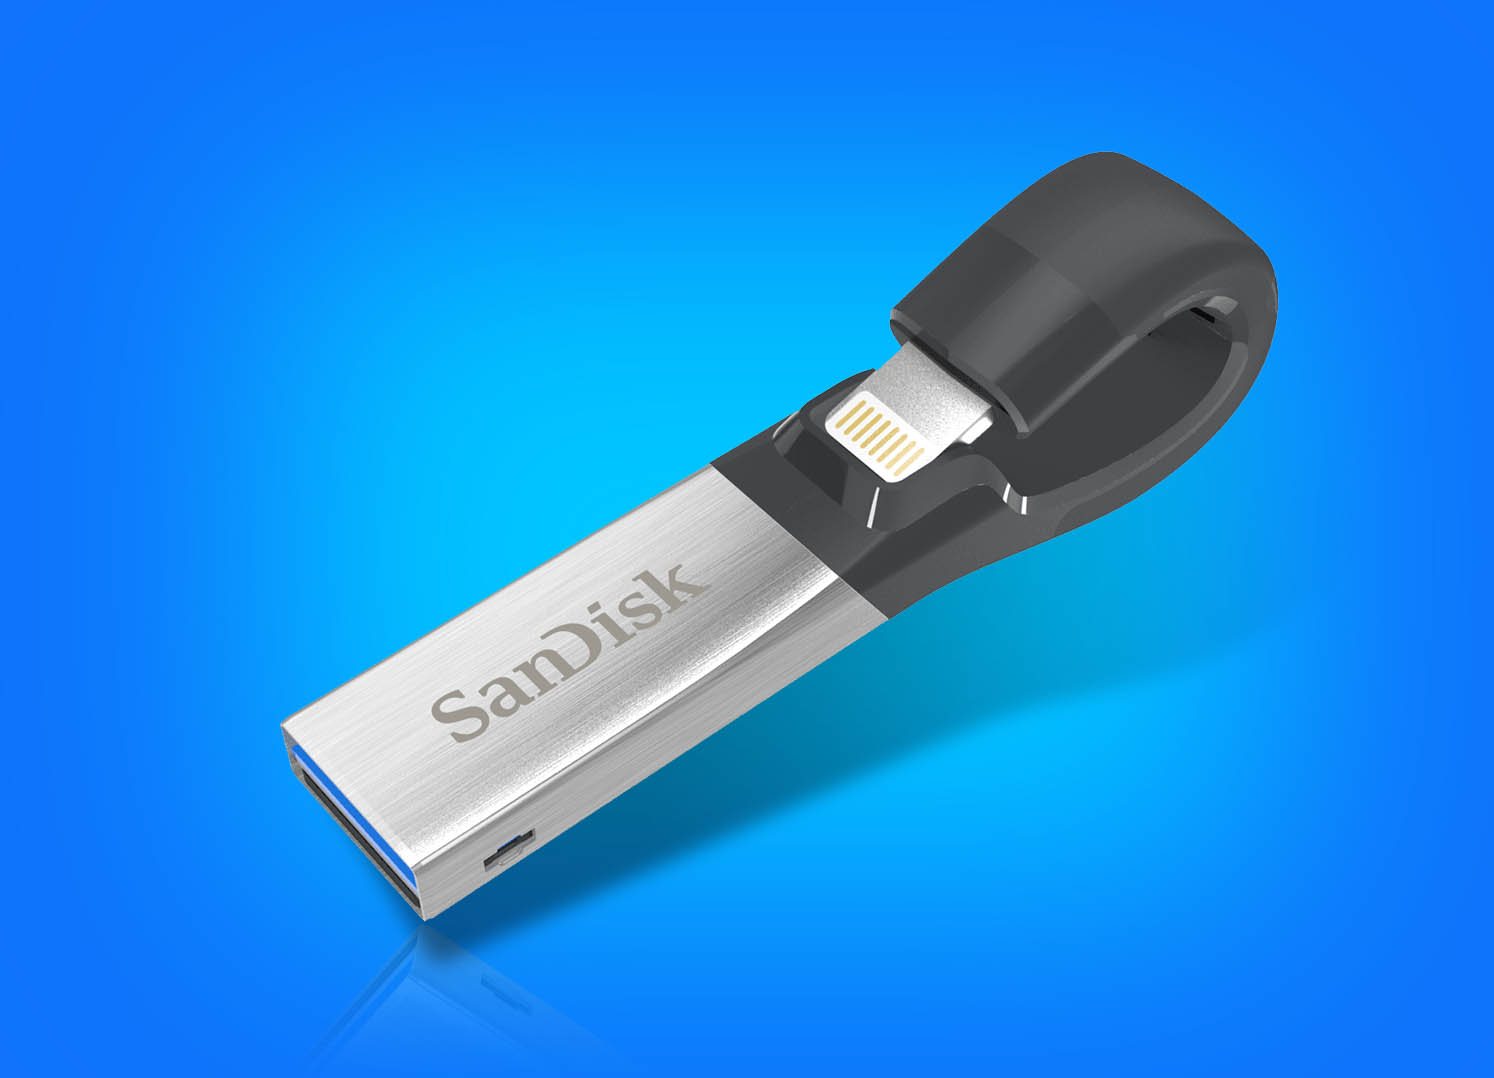 All-new! SanDisk iXpand Flash Drive